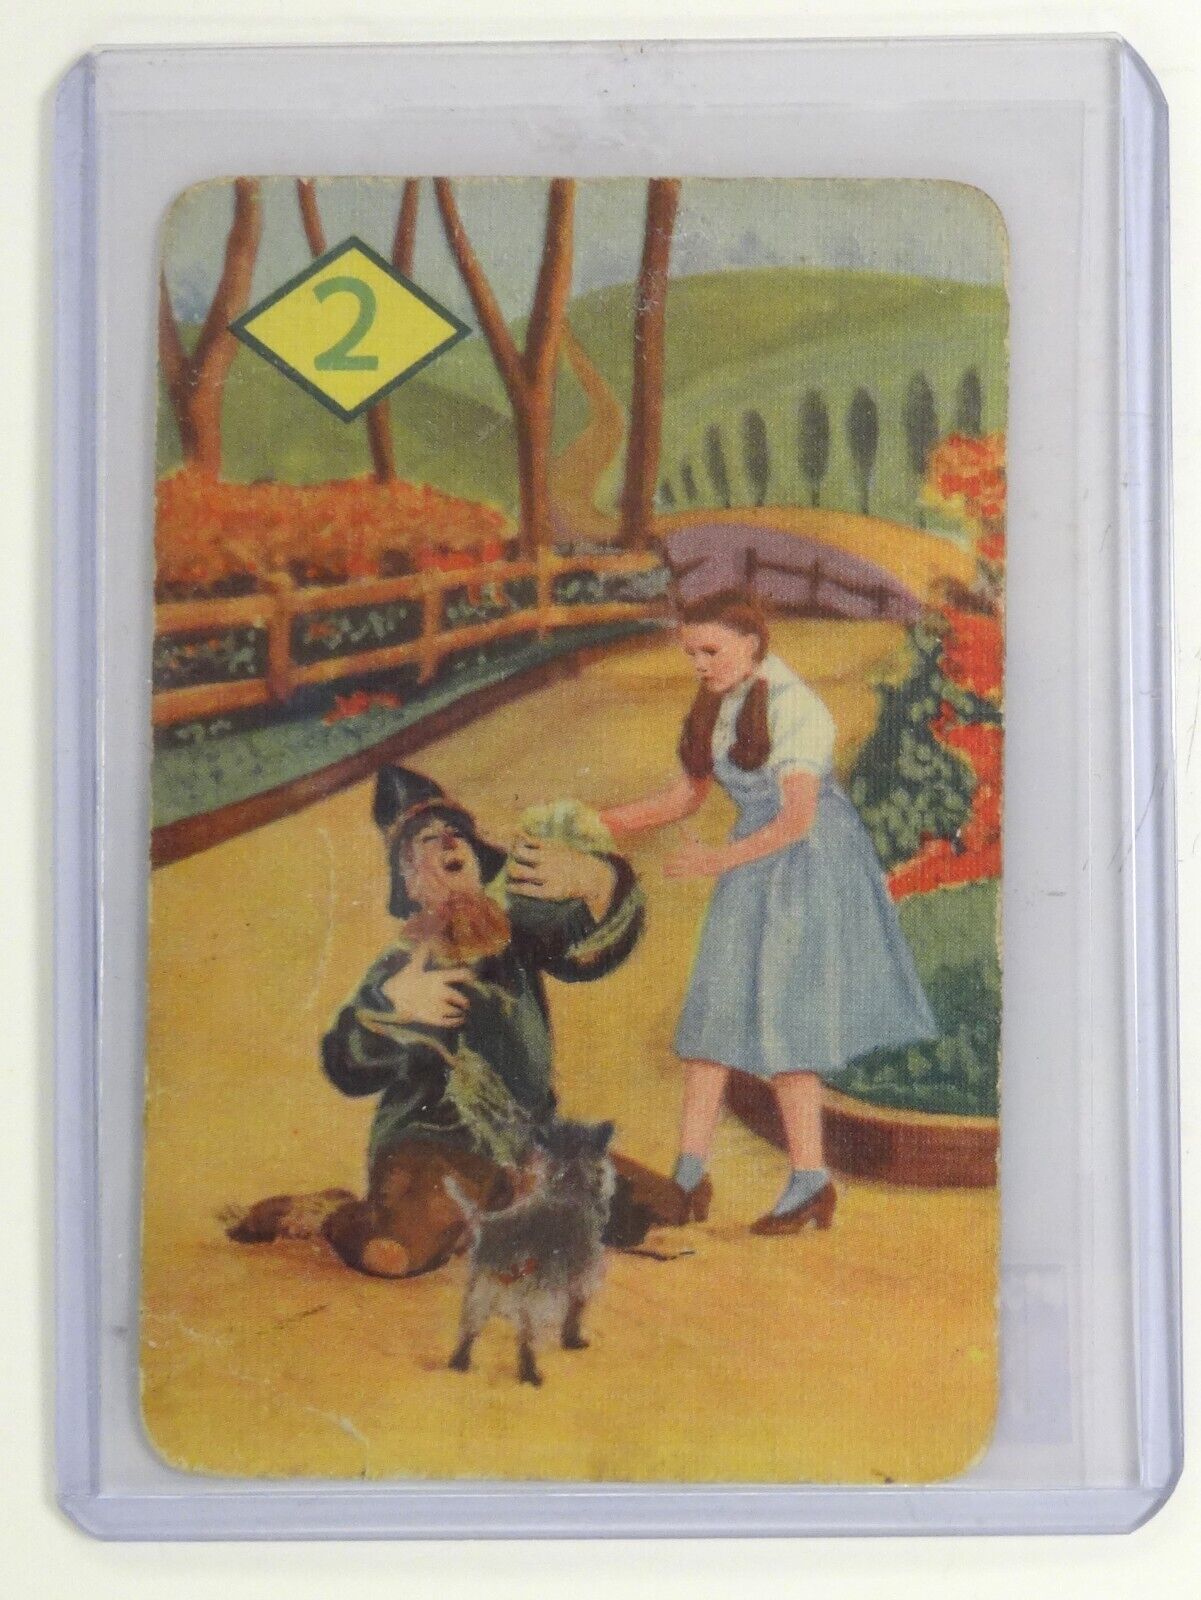 WIZARD OF OZ VINTAGE 1940 CASTELL CARD #2 DOROTHY AND SCARECROW